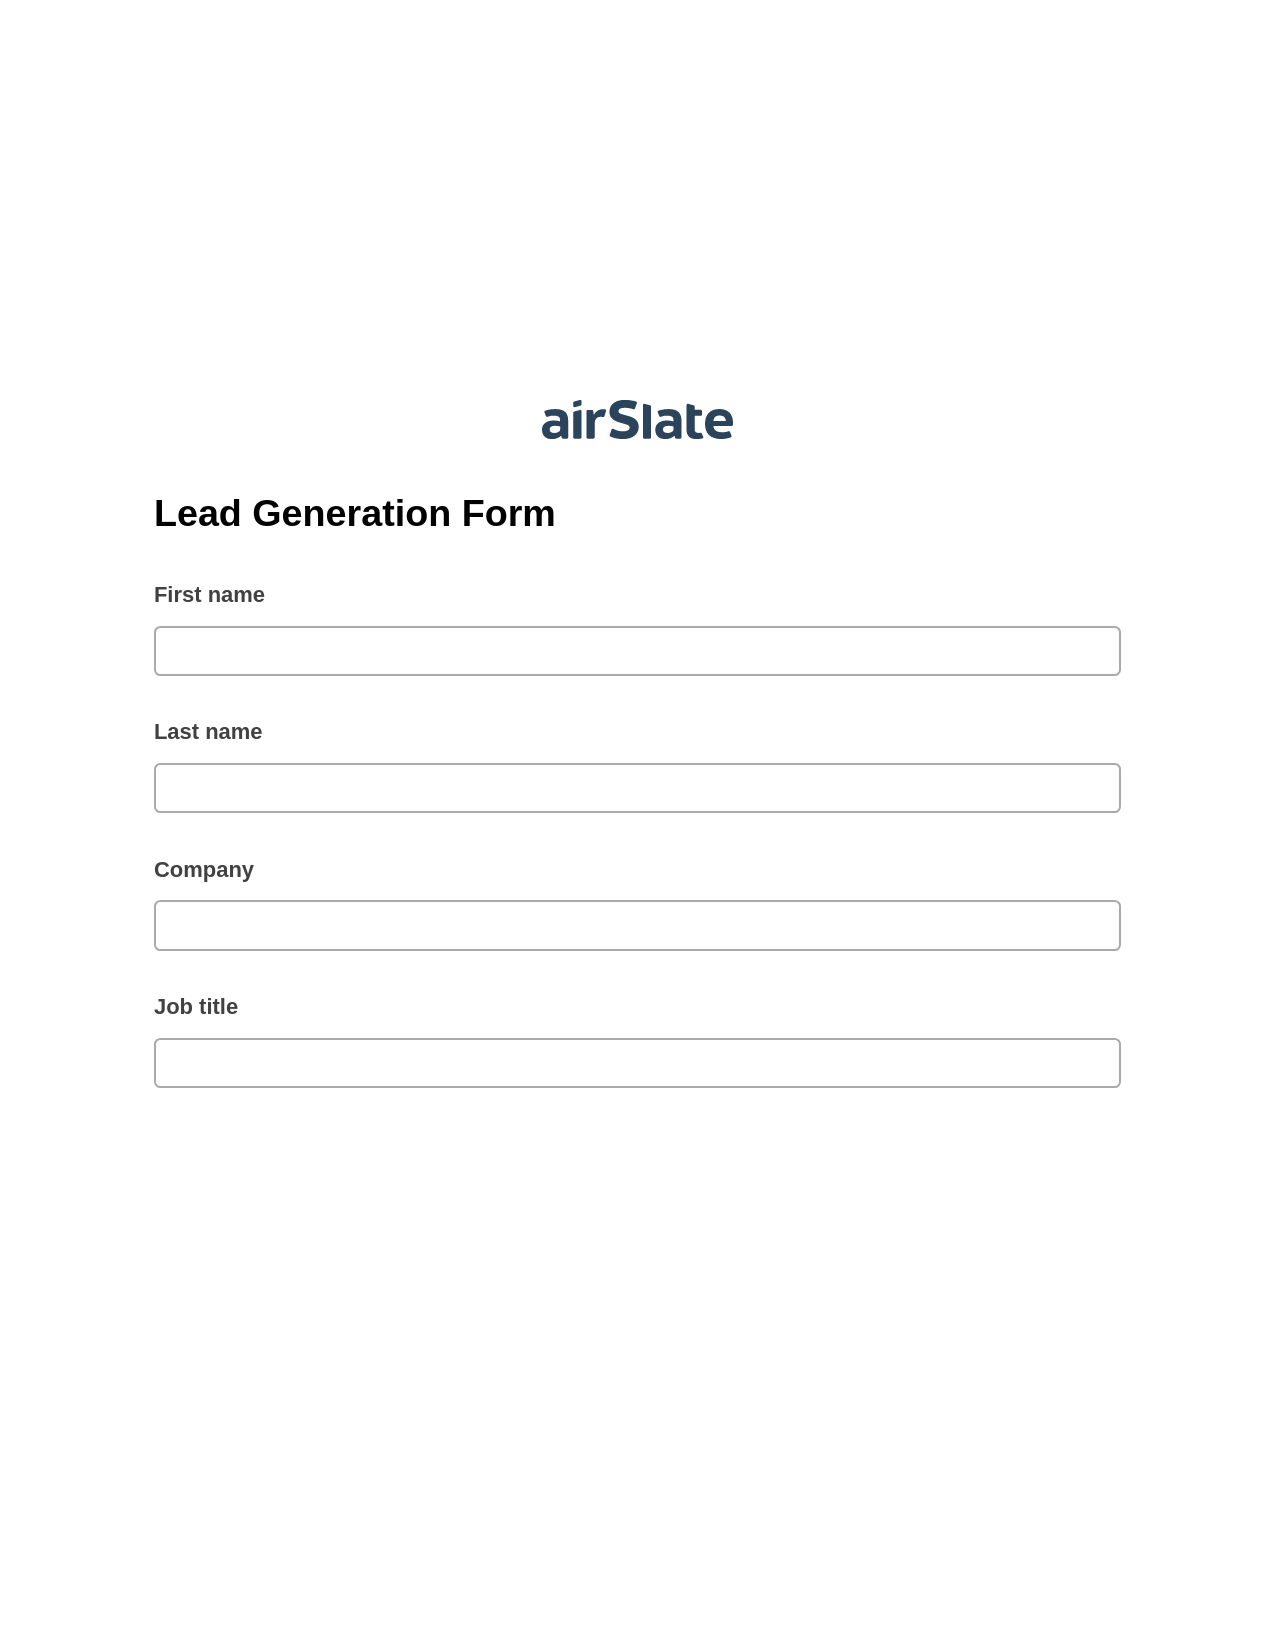 Lead Generation Form Pre-fill from Salesforce Records Bot, Send a Slate to Salesforce Contact Bot, Archive to Box Bot